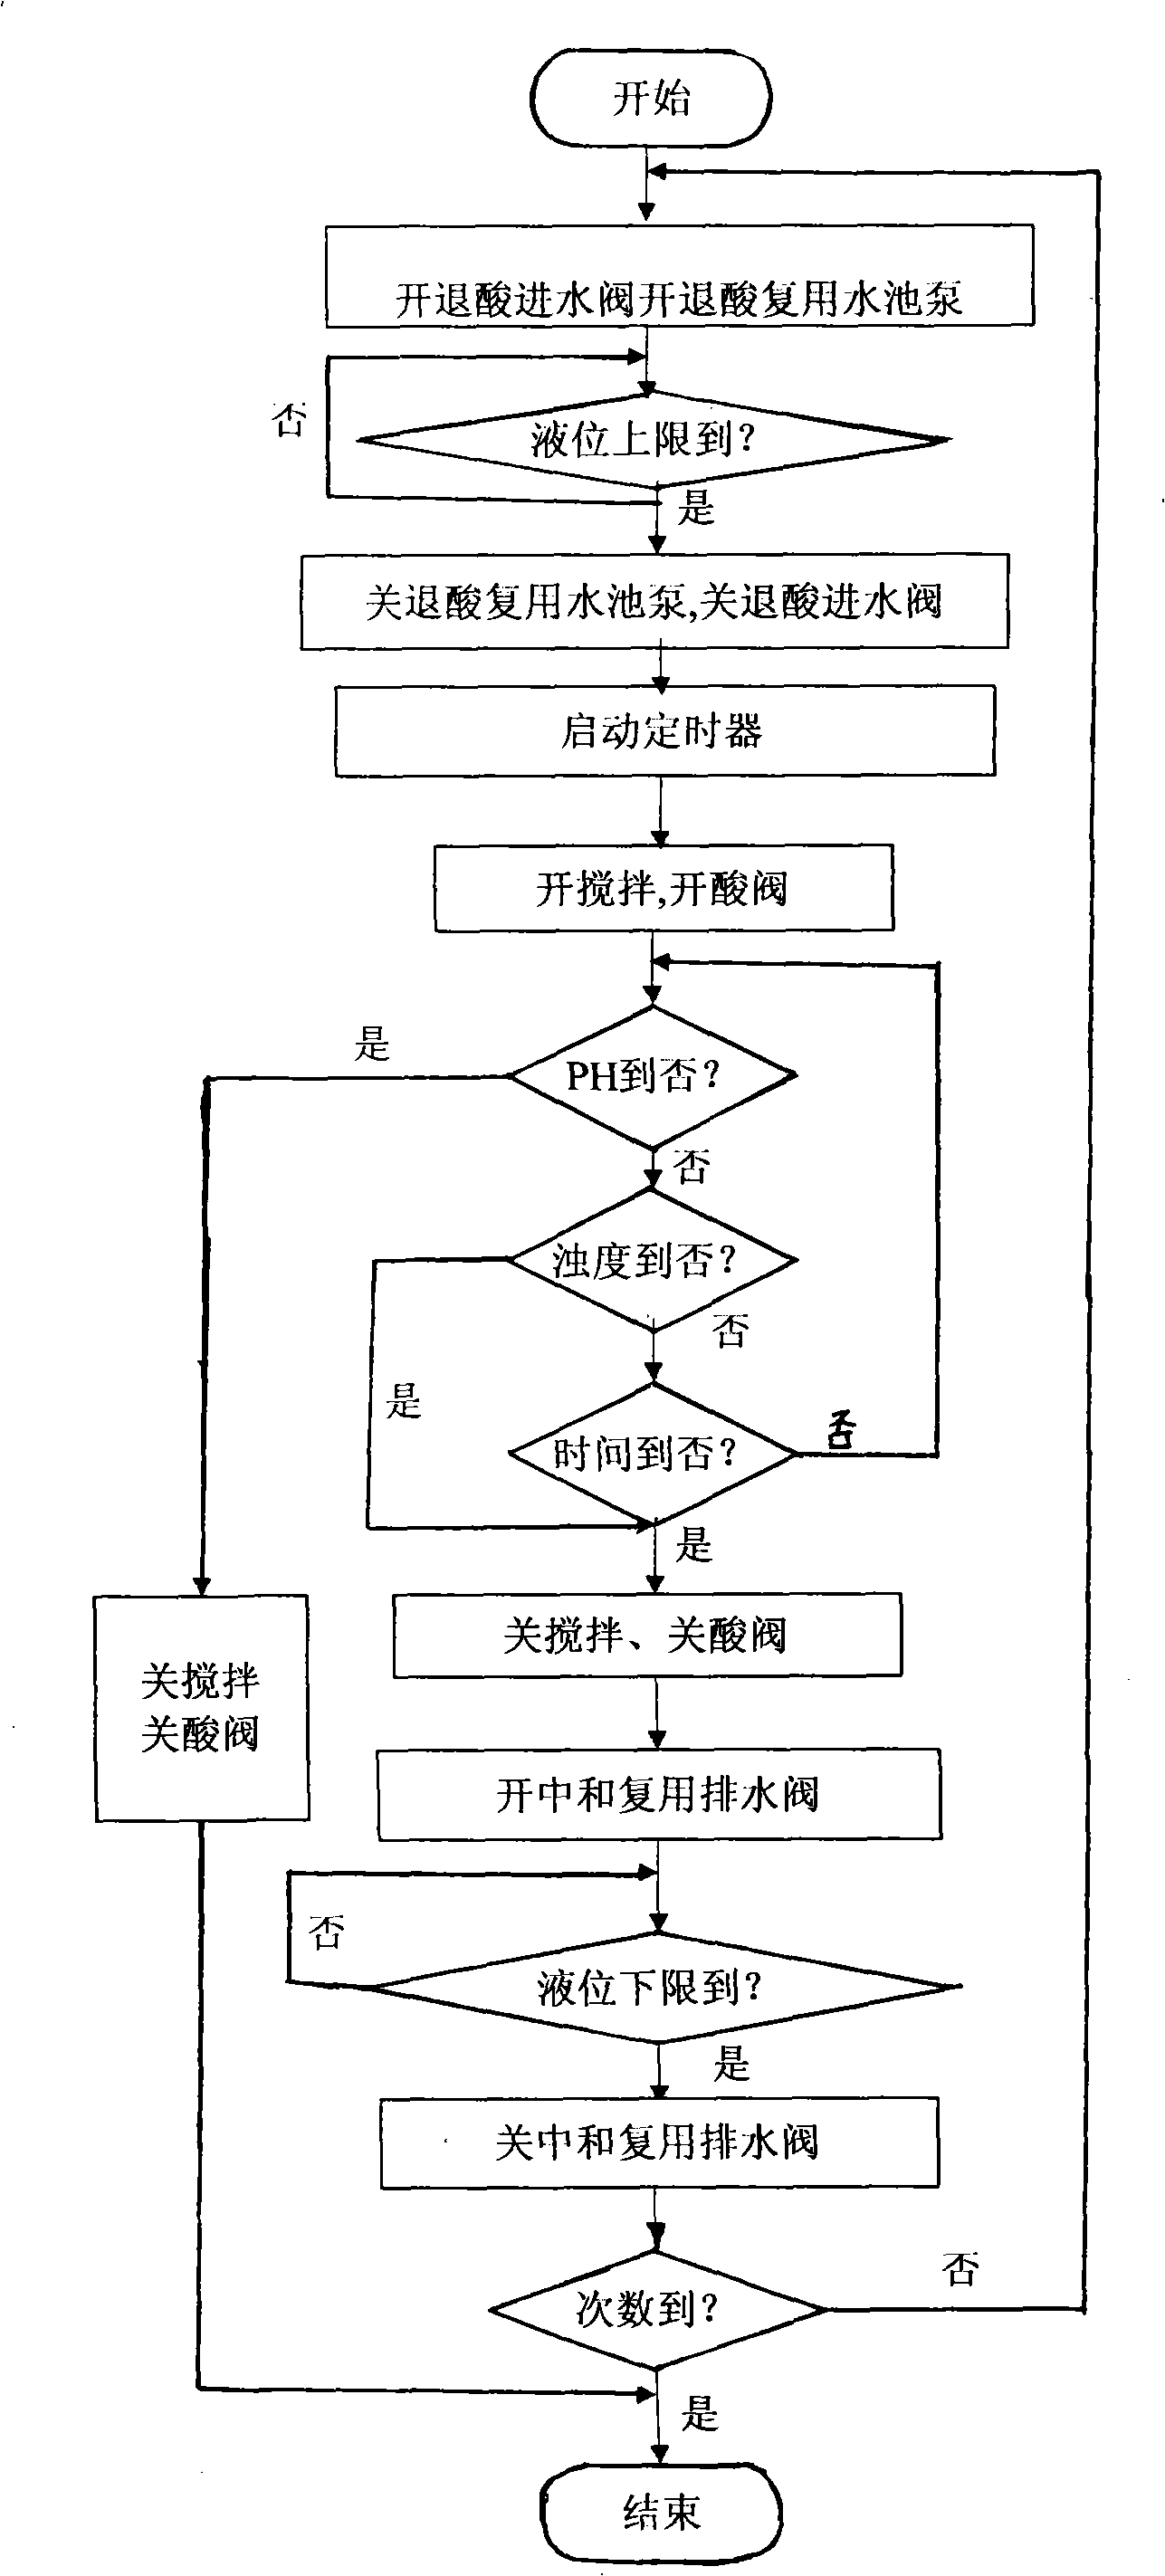 Automatic control system for neutralization process in gelatin production